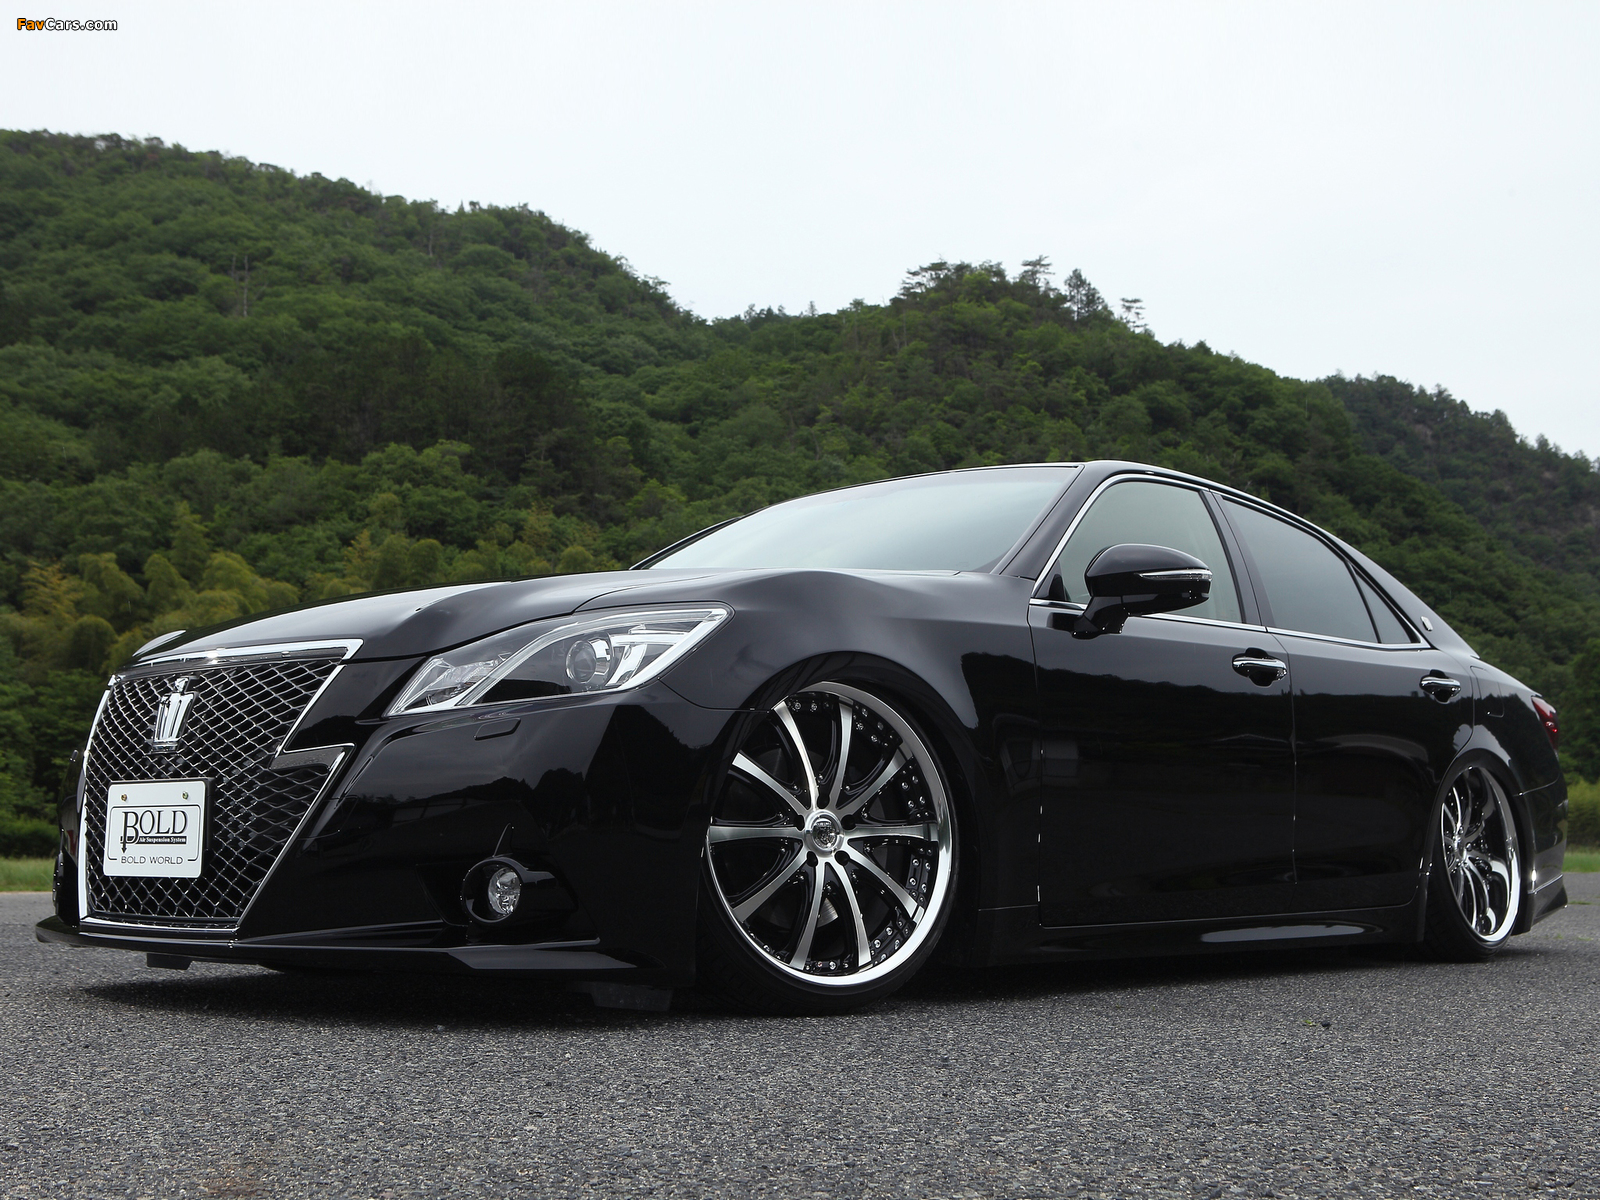 Bold World Toyota Crown Athlete (S210) 2012 pictures (1600 x 1200)